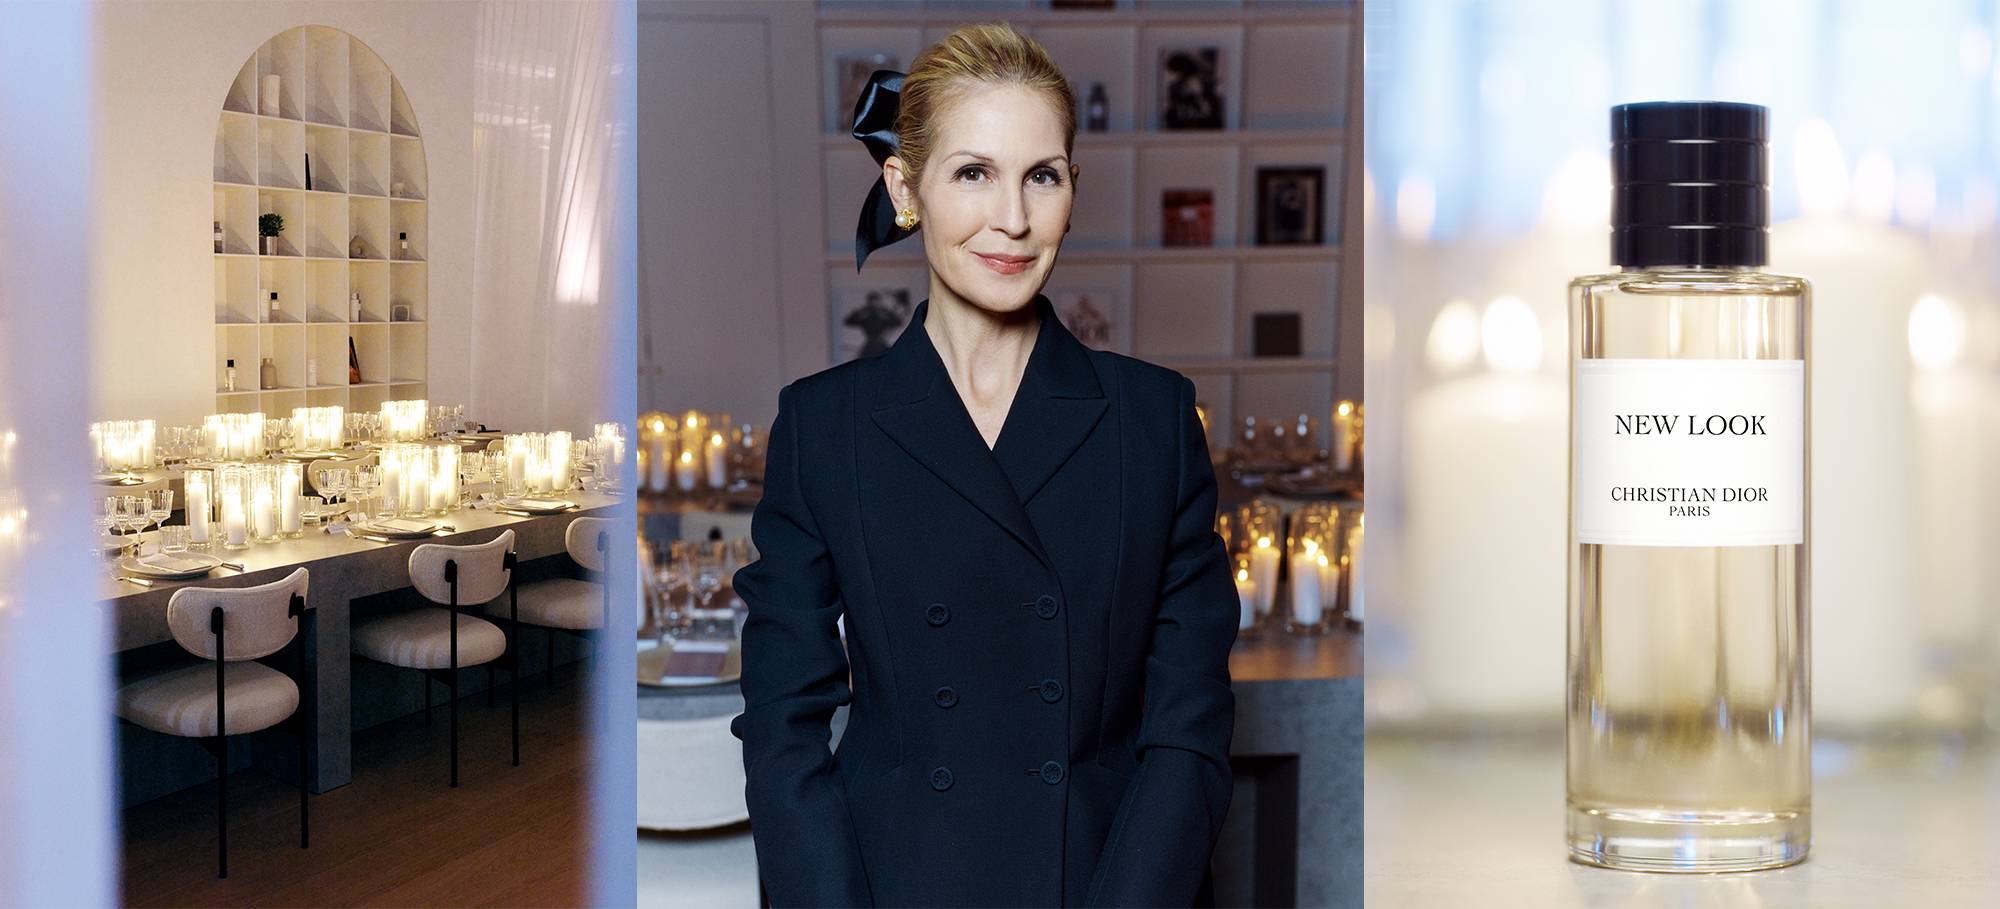 NEW LOOK PORTRAIT KELLY RUTHERFORD - CREDIT PHOTO THOMAS CHENE POUR CHRISTIAN DIOR PARFUMS